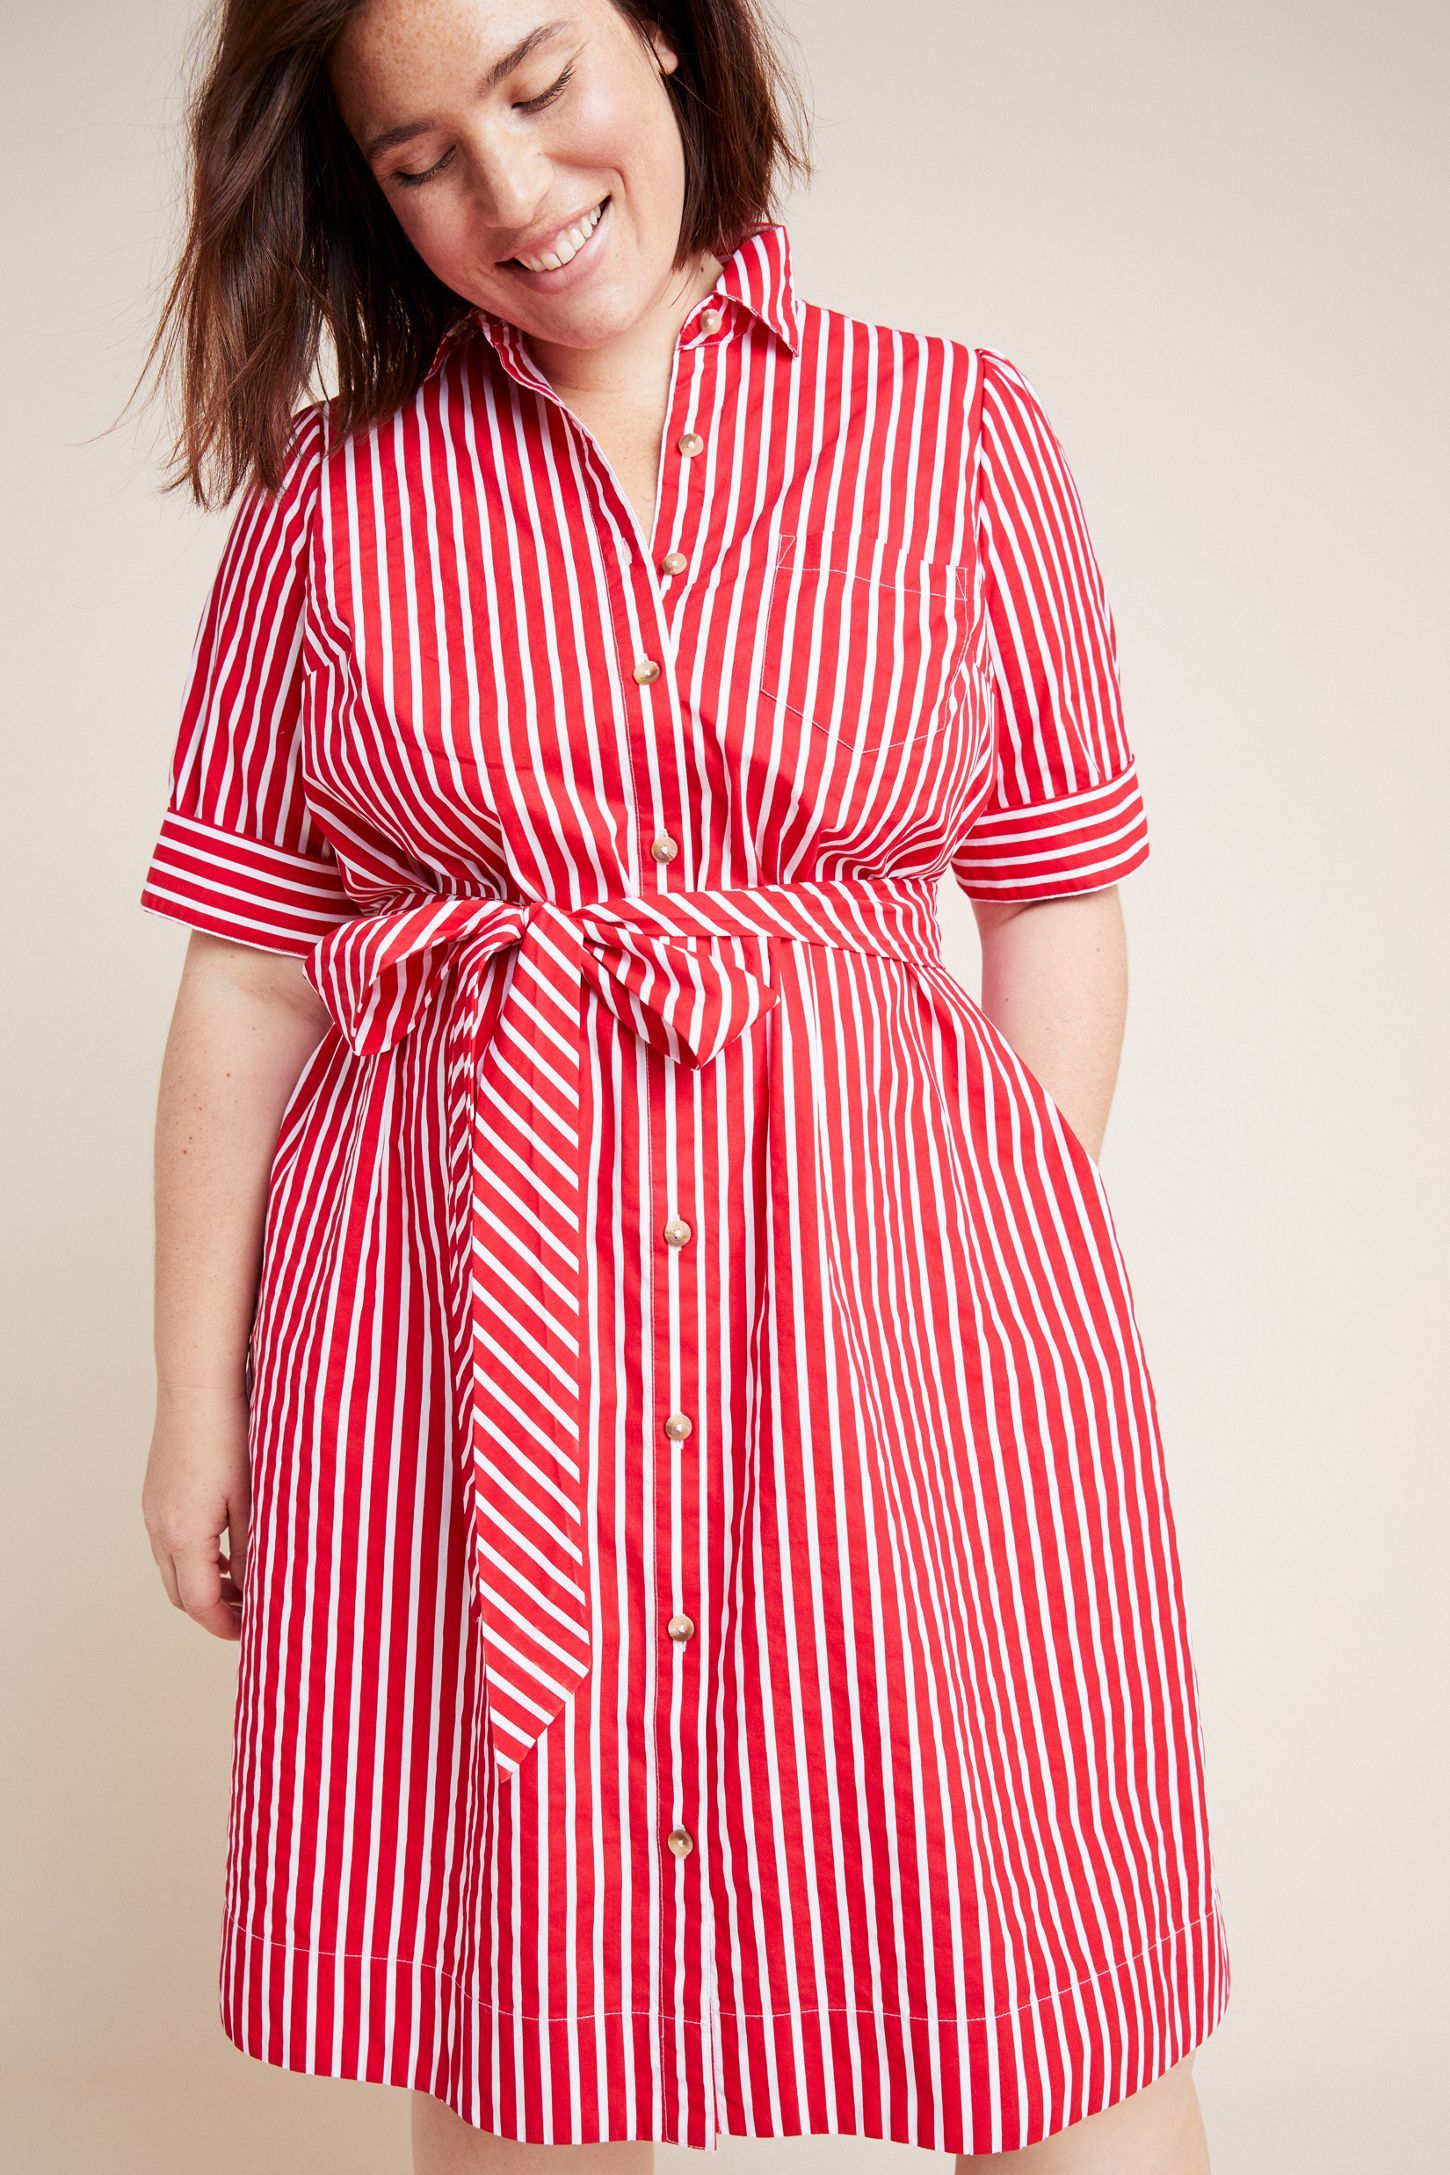 Anthropologie Striped Dress + Clare V Striped Tote — bows & sequins